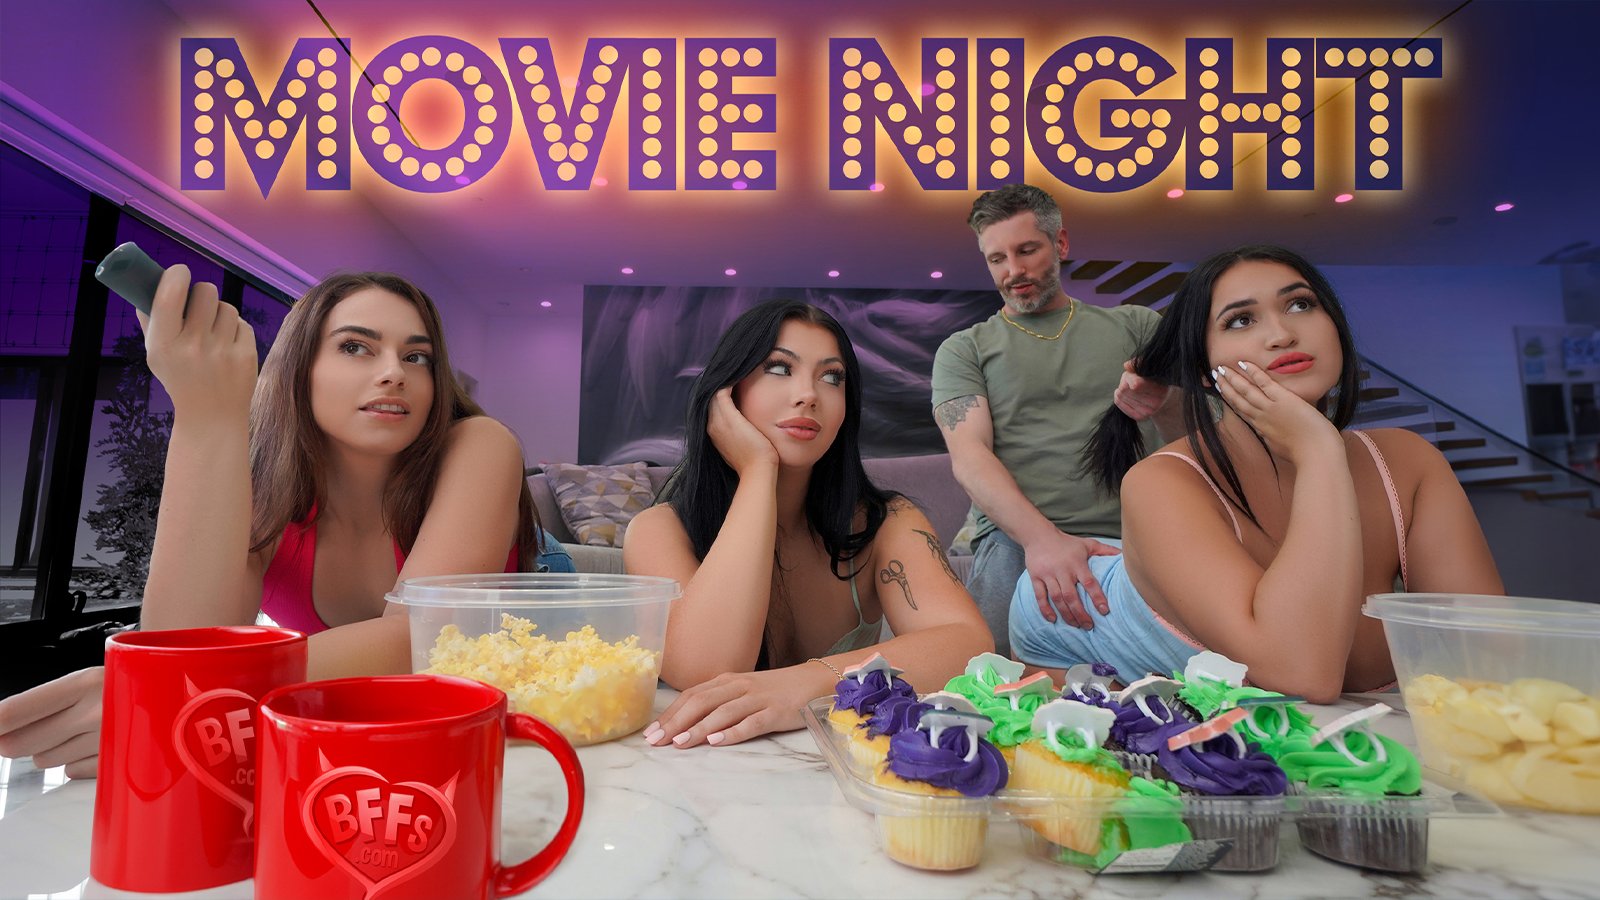 BFFs &#8211; Sophia Burns, Holly Day And Nia Bleu &#8211; There Is Nothing Like Movie Night